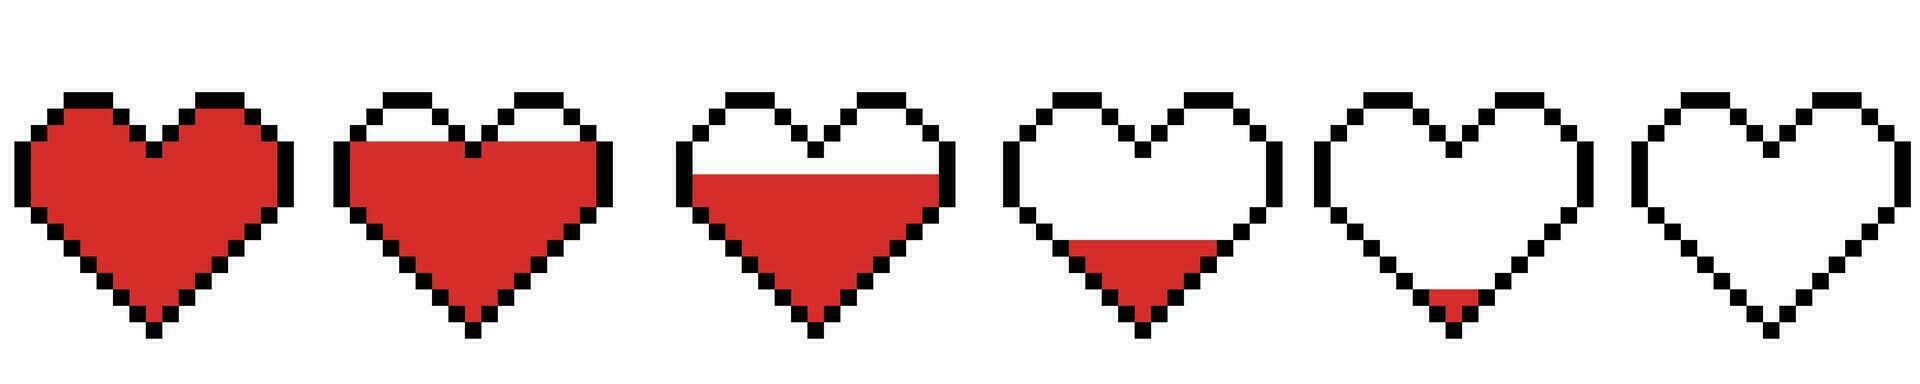 Pixel heart collection. Pixel heart icon, pixel hearts for game. Red hearts of life, game life symbol. Indicators of health, game progress bars. Vector